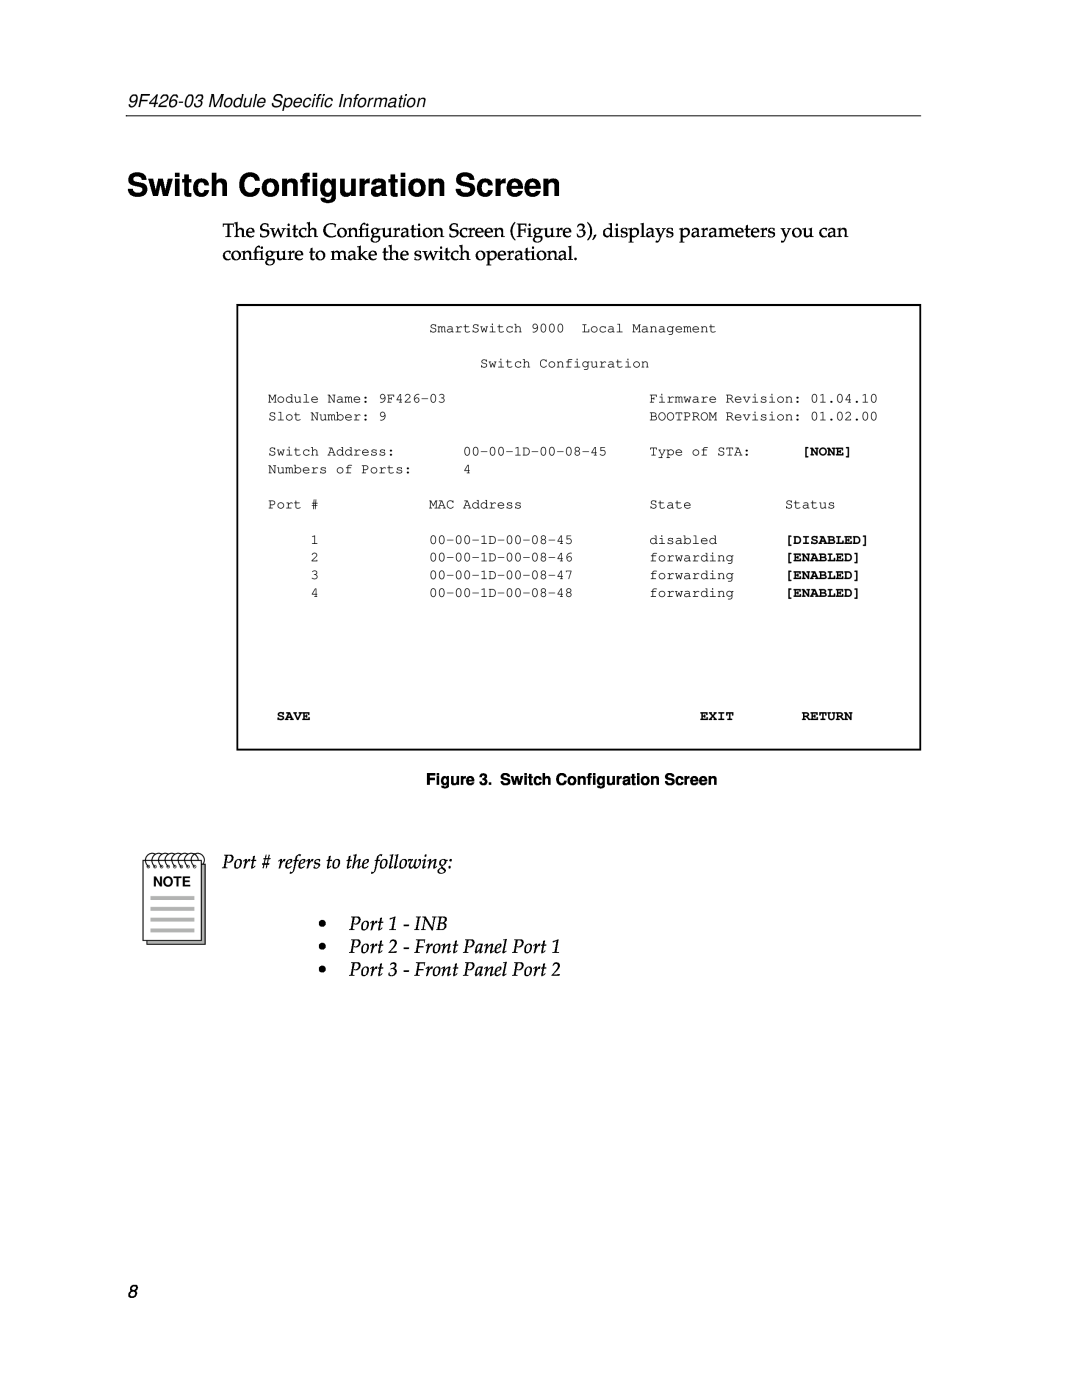 Cabletron Systems Switch Conﬁguration Screen, Port 3 - Front Panel Port, 9F426-03 Module Speciﬁc Information, None 